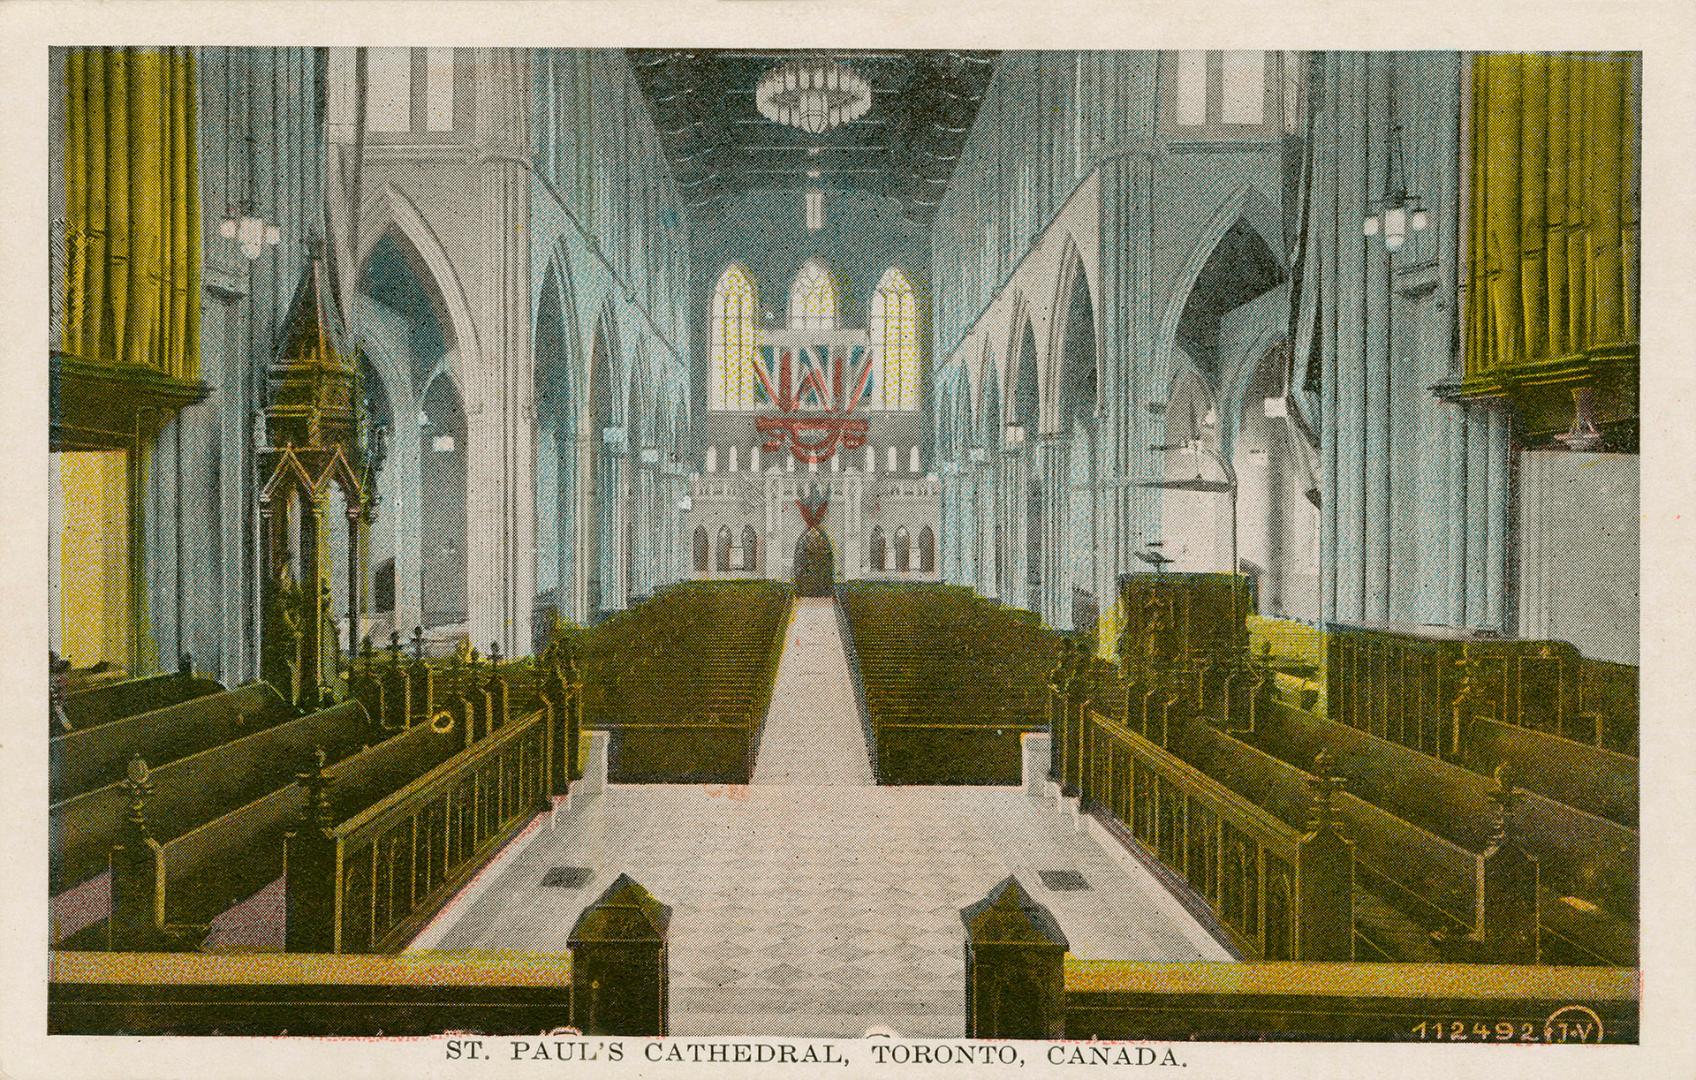 St. Paul's Cathedral, Toronto, Canada. [Interior]